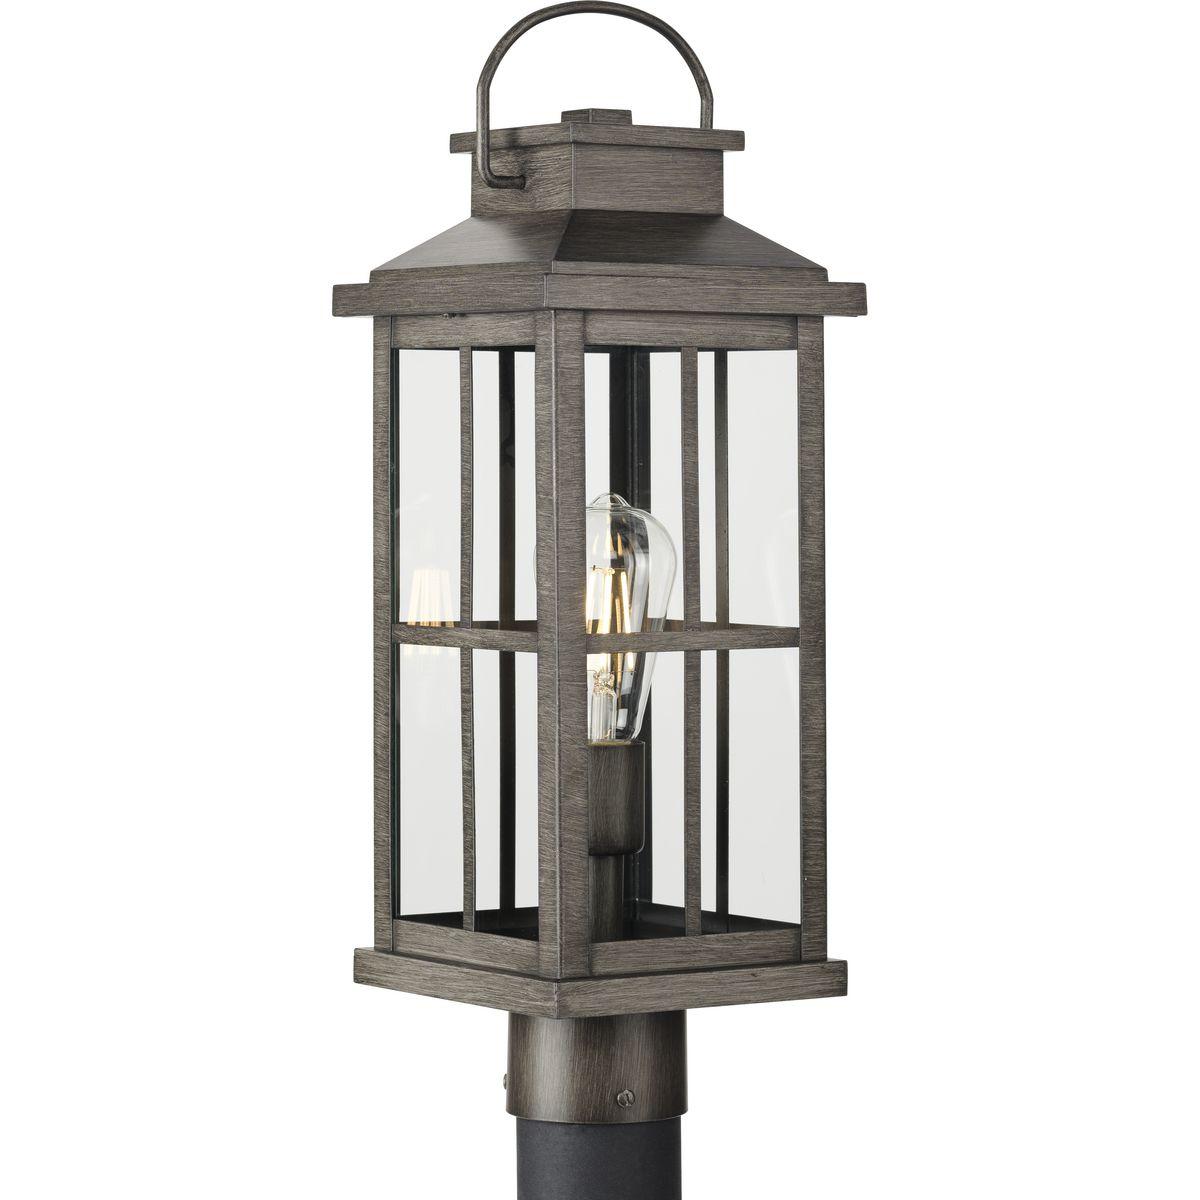 Hubbell P540095-103 Bring timeless details into a fresh silhouette with the Williamston Collection 1-Light Antique Pewter Clear Glass Farmhouse Outdoor Post Lantern Light. The frame's two-over-two grille design reminiscent of a traditional casement window frame is coated in 